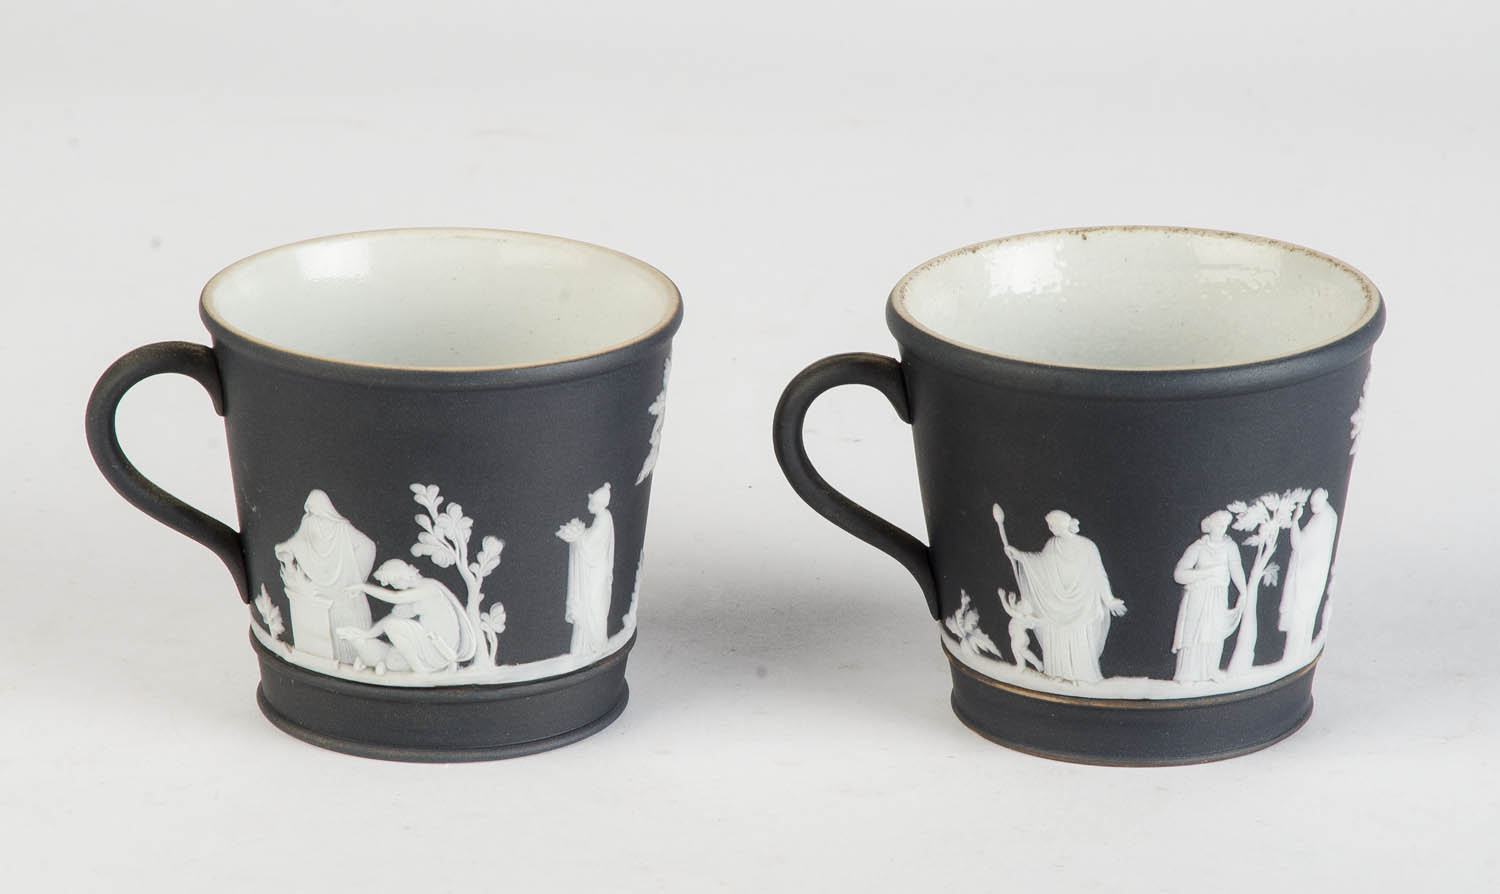 A pair of Wedgwood black jasper cups and saucers, English, 19th century 7cm high